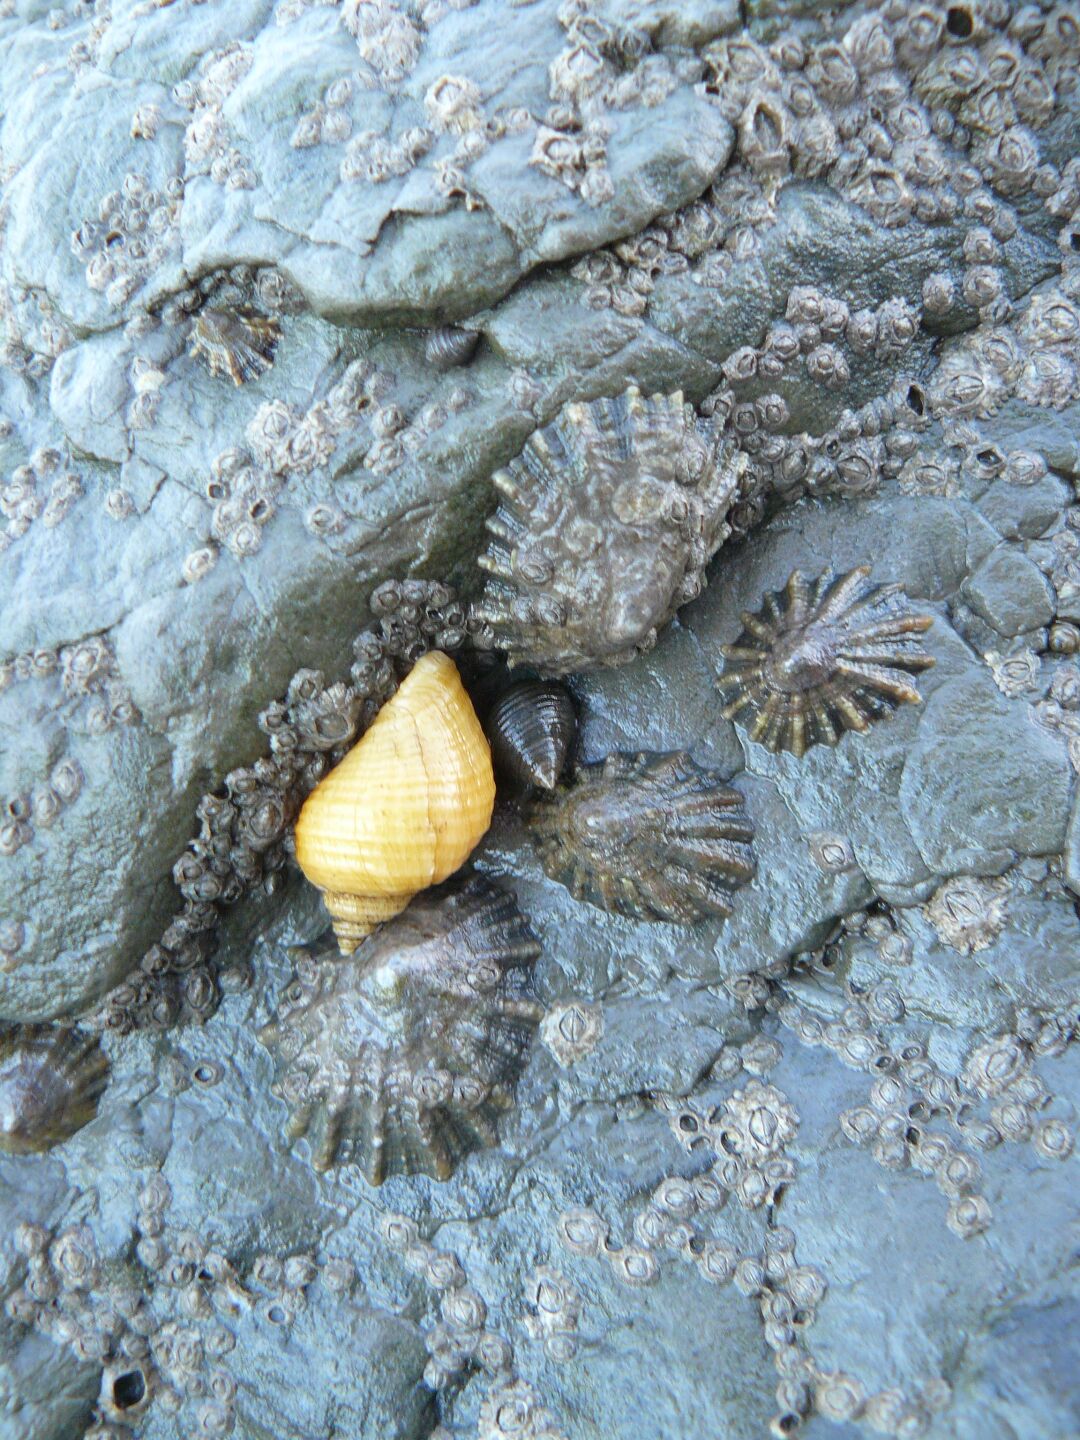 The occasional yellow snail can be found between her star-shaped grey relatives.